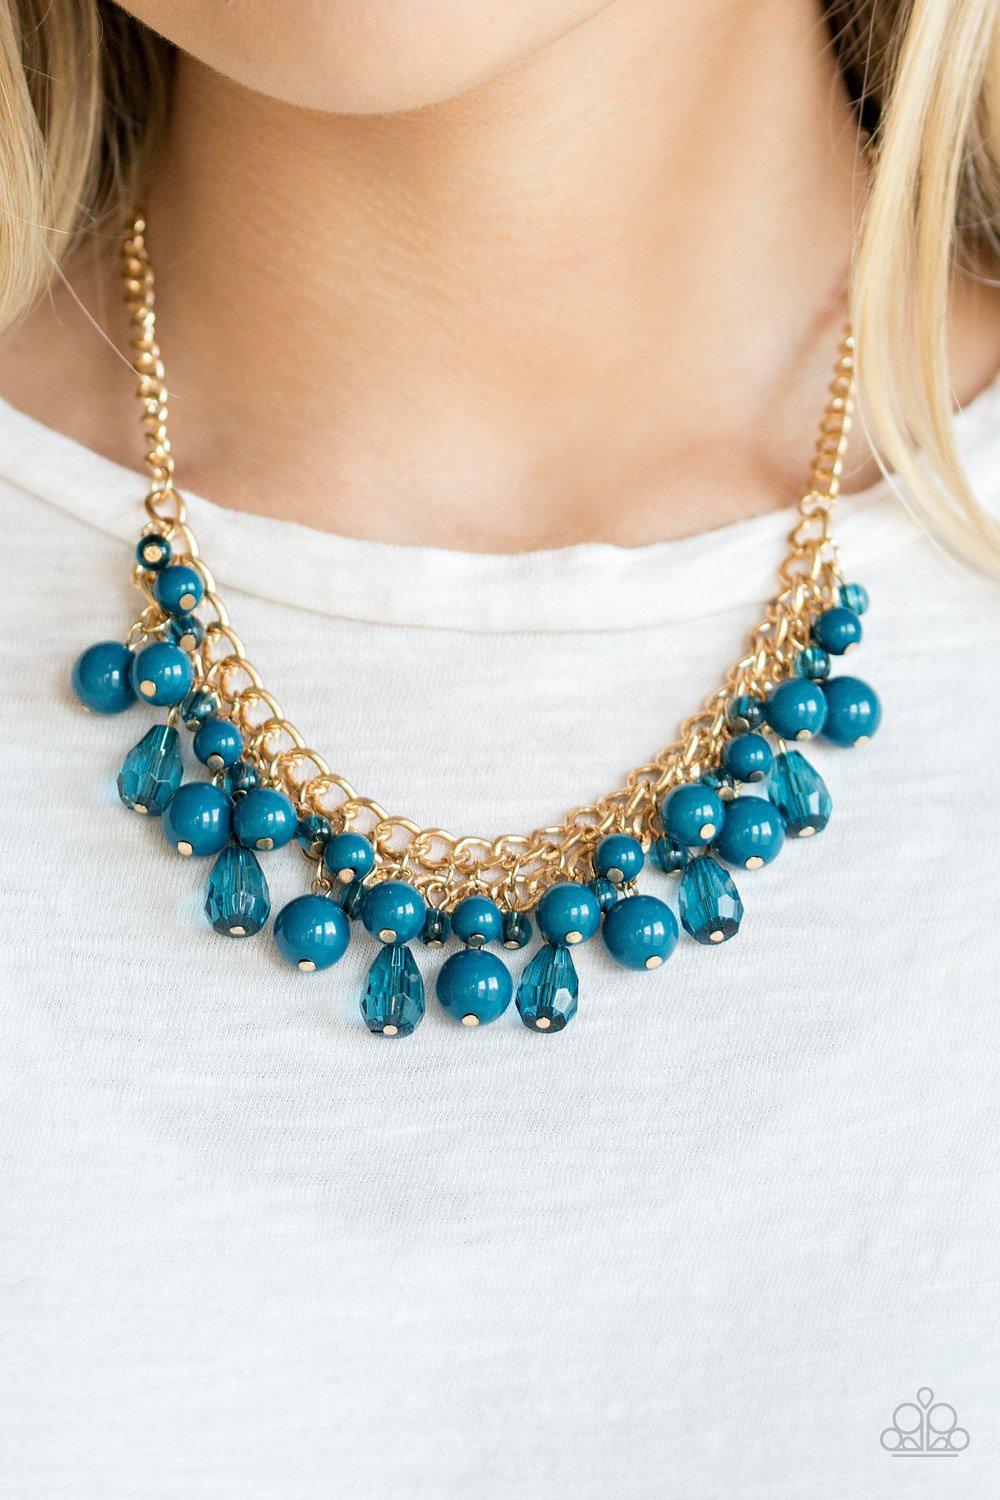 Tour de Trendsetter Blue and Gold Necklace - Paparazzi Accessories - lightbox -CarasShop.com - $5 Jewelry by Cara Jewels